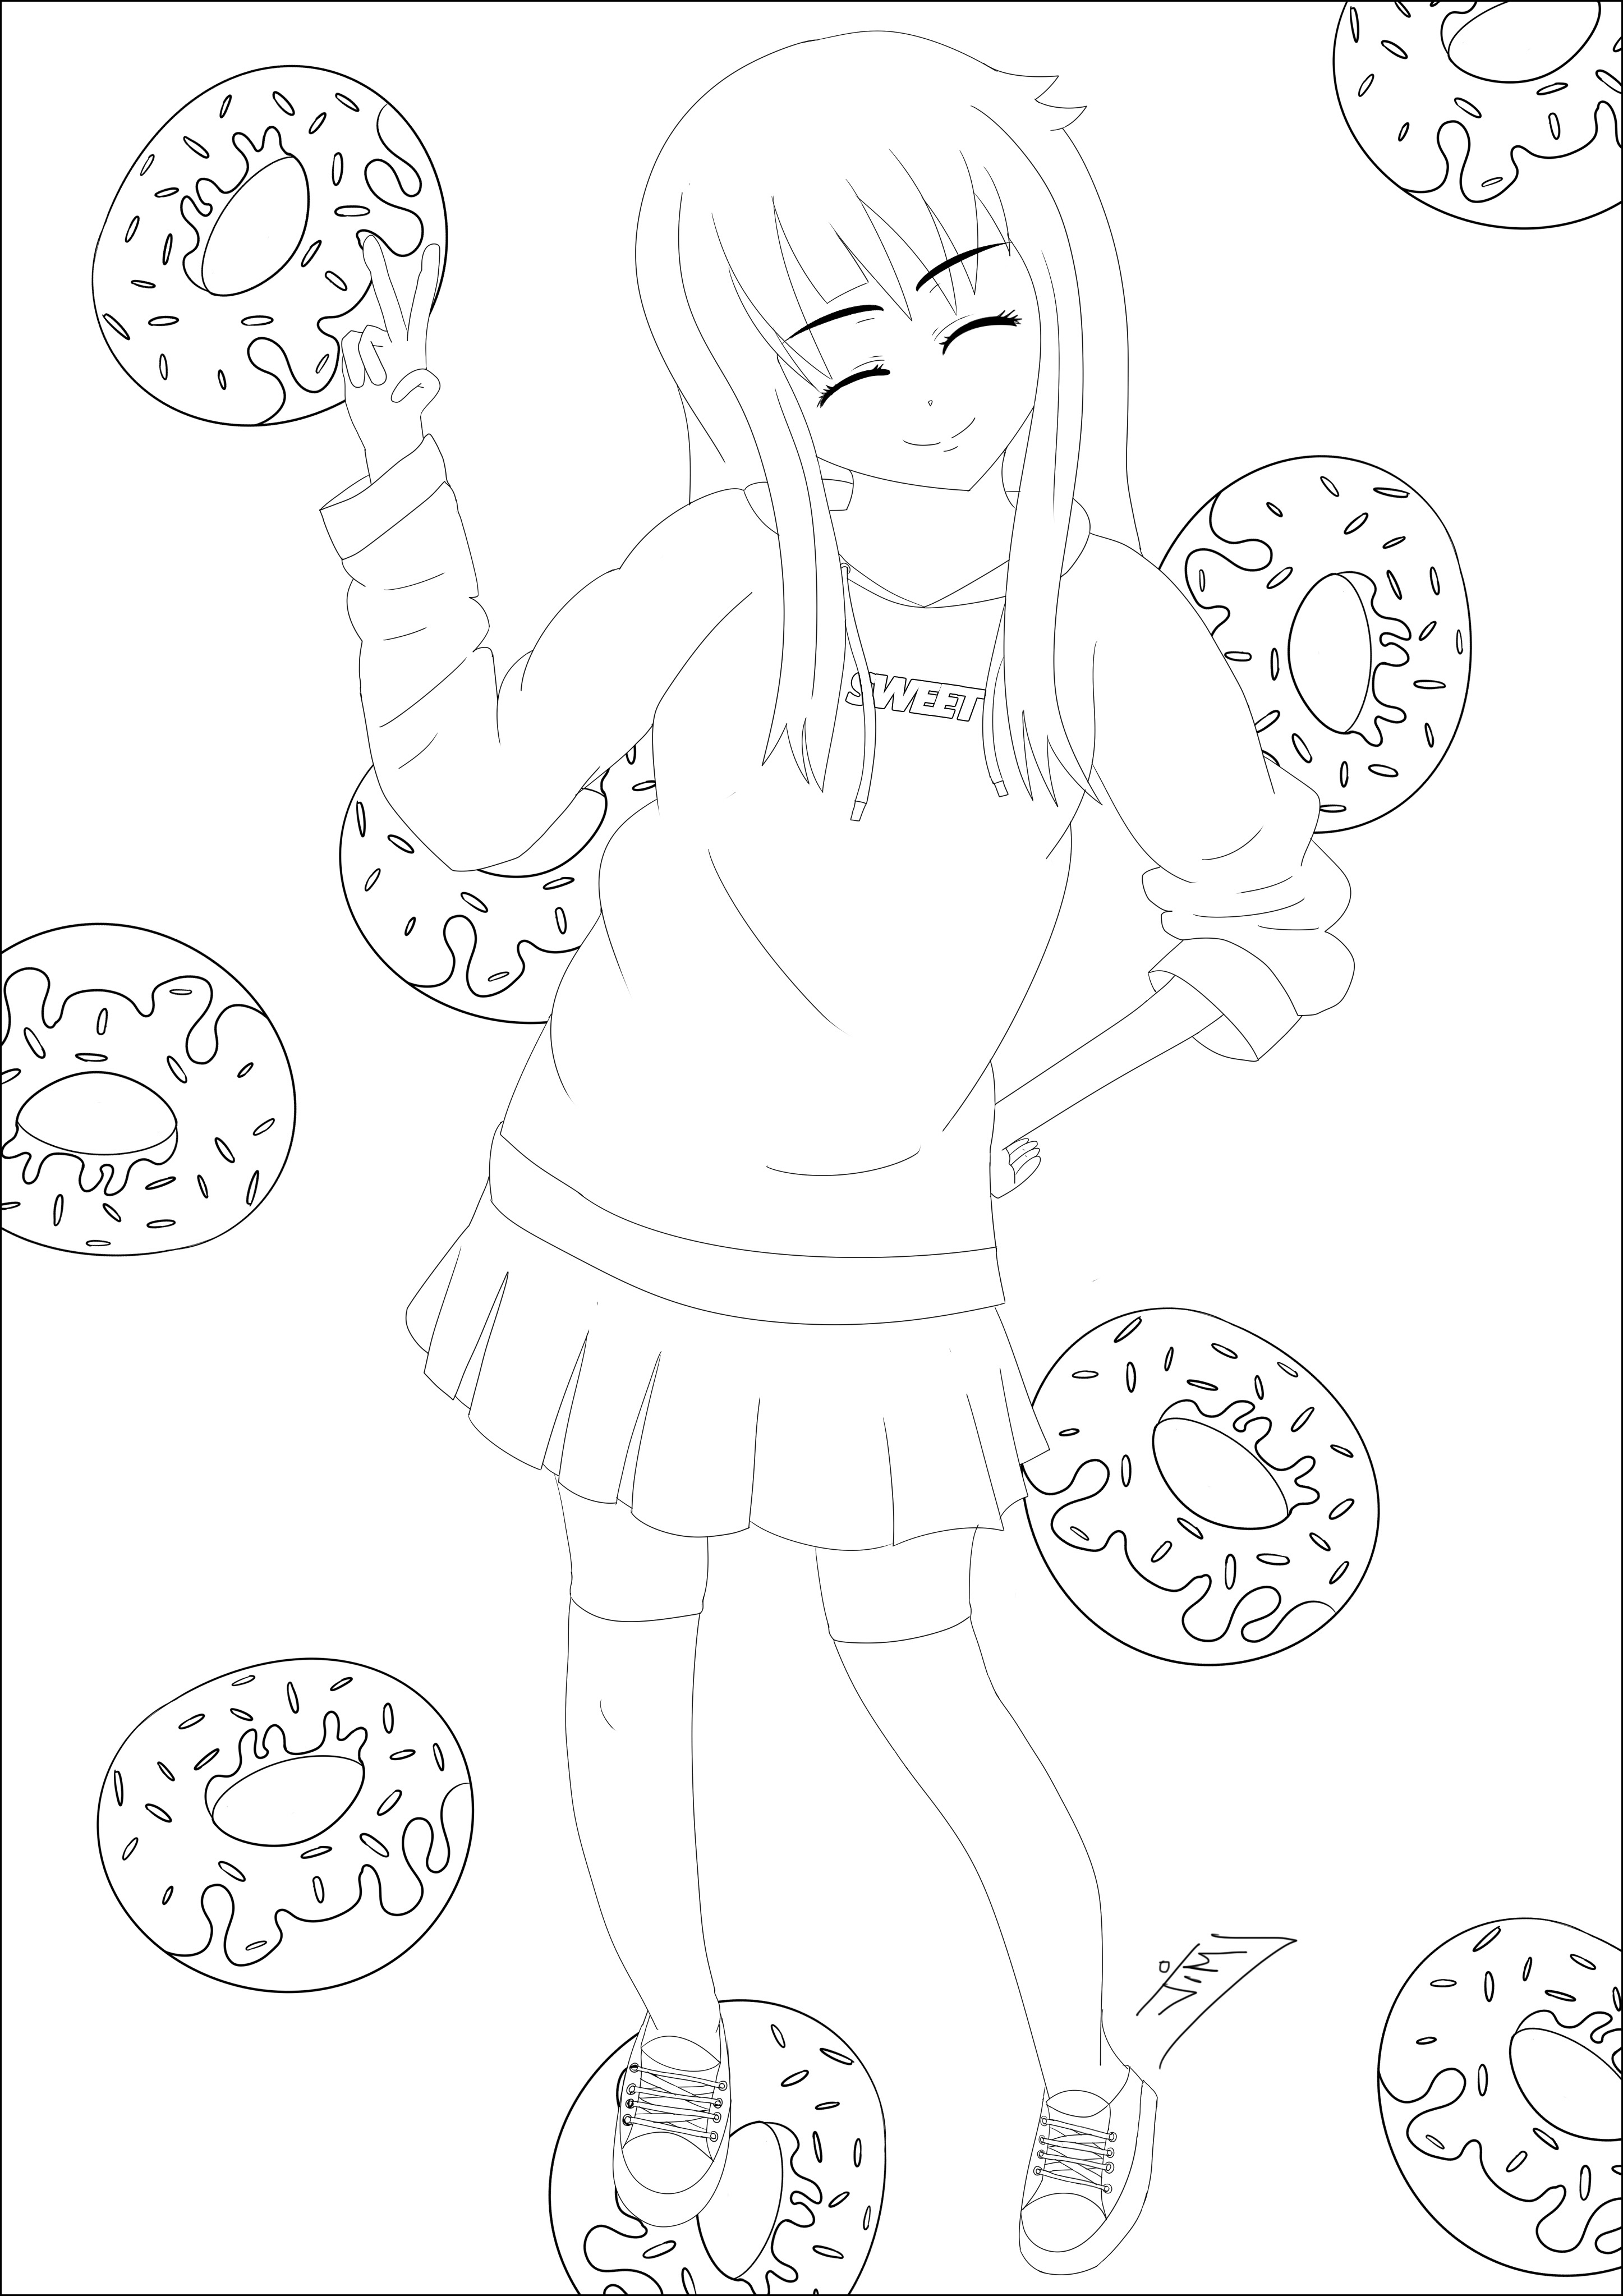 Girl and a shower of donuts. A very Manga / Anime style drawing, Artist : Ji. M